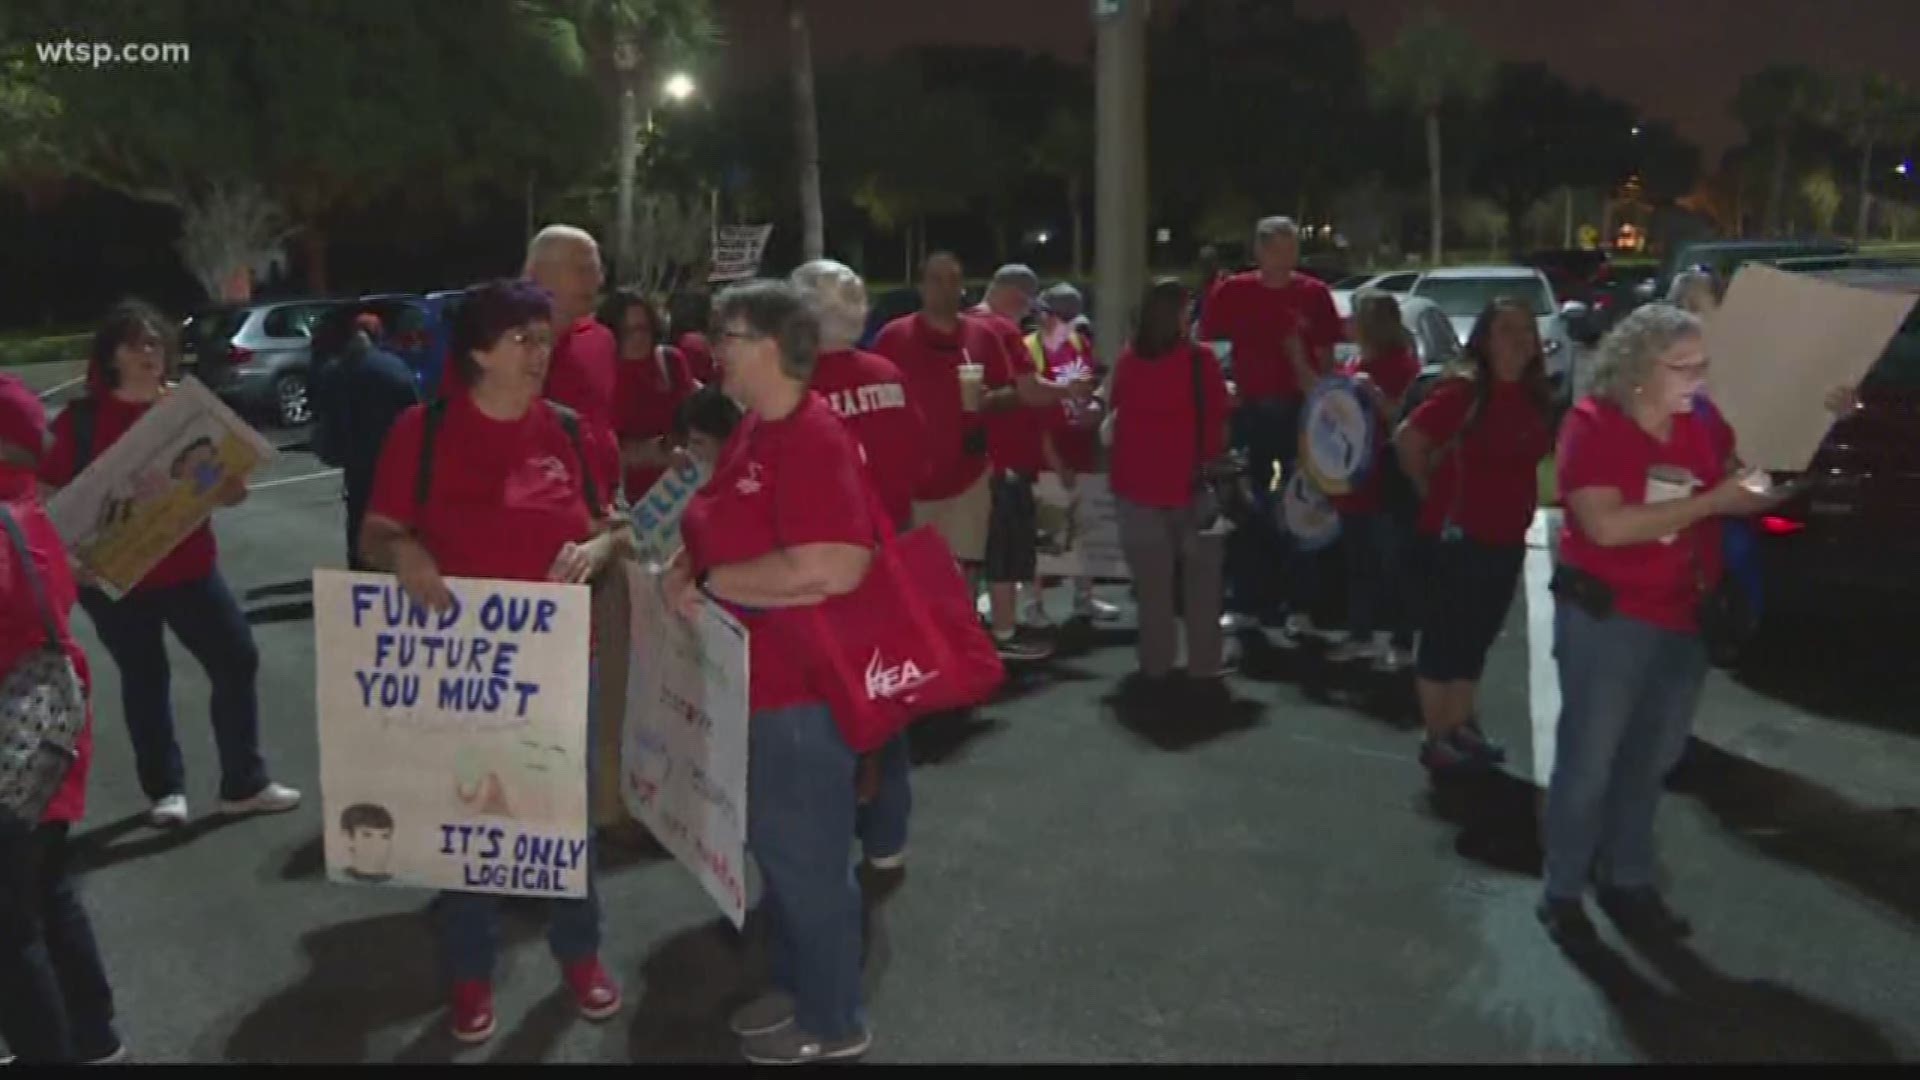 The largest group of school employees headed to Tallahassee comes from Polk County.